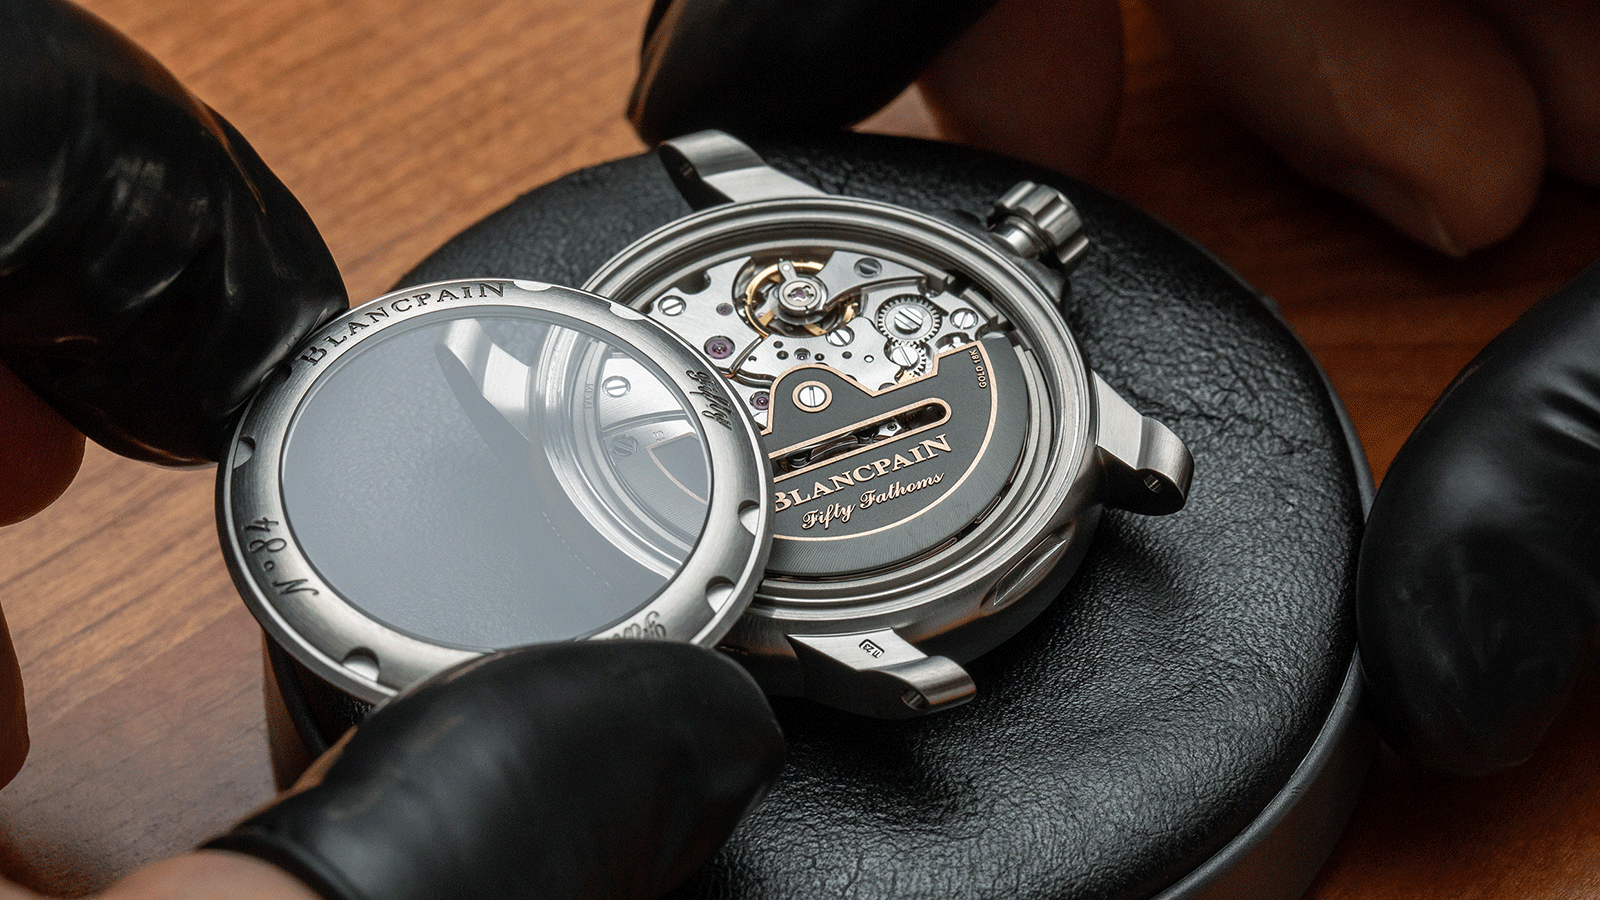 Beating at the heart of these new Fifty Fathoms Automatique watches is Calibre 1315: a movement boasting unrivalled chronometric (precision timing) performance and that is designed, built, produced, assembled and adjusted in-house.